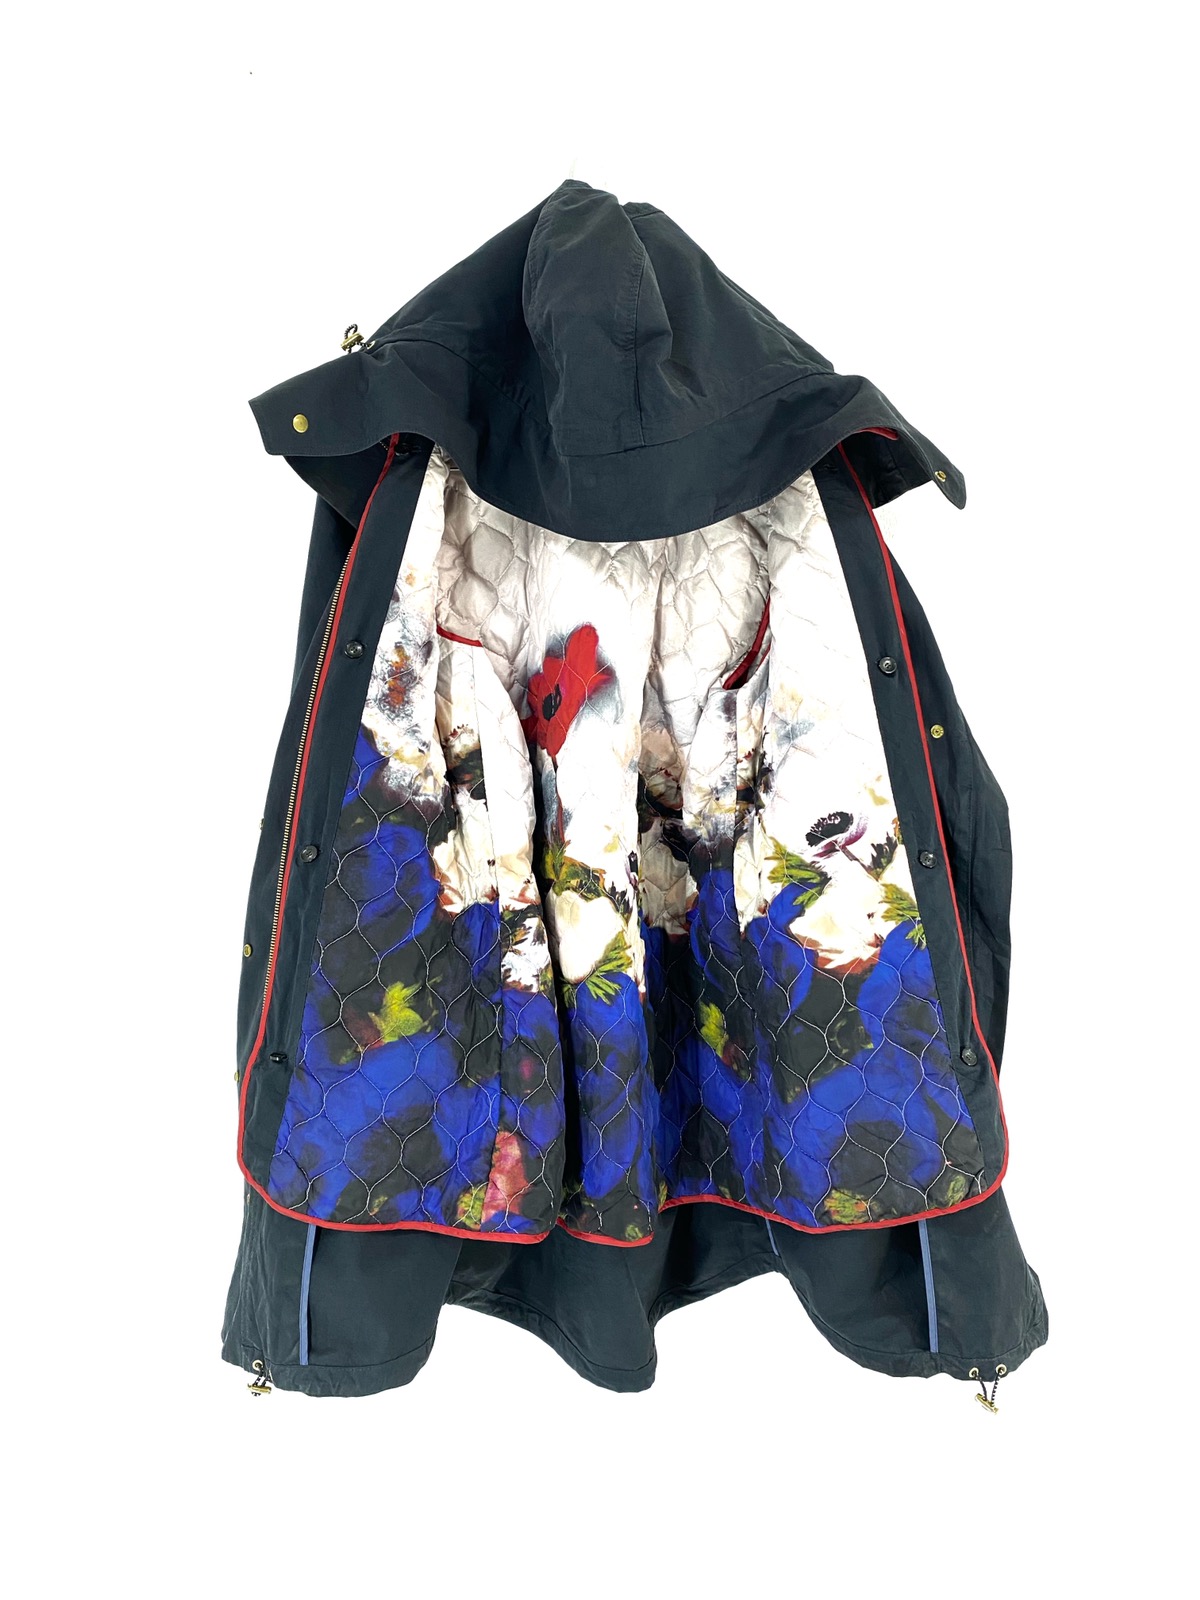 Paul Smith Parka Floral Lining Nice Design With Hoodies - 1